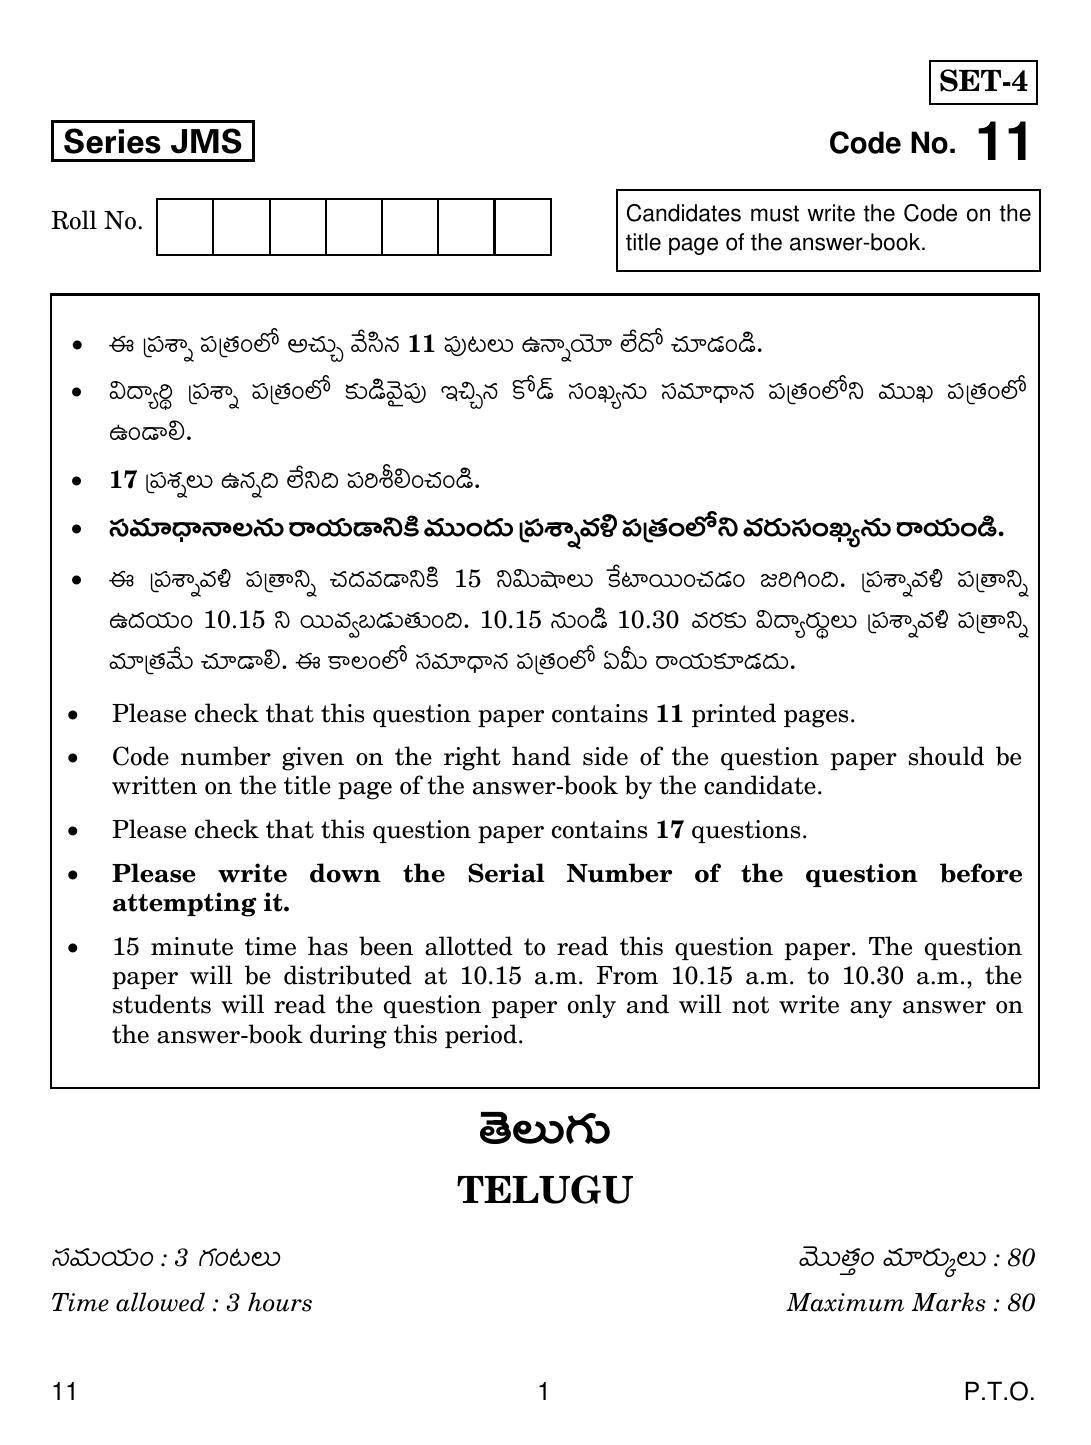 CBSE Class 10 11 Telug 2019 Question Paper - Page 1